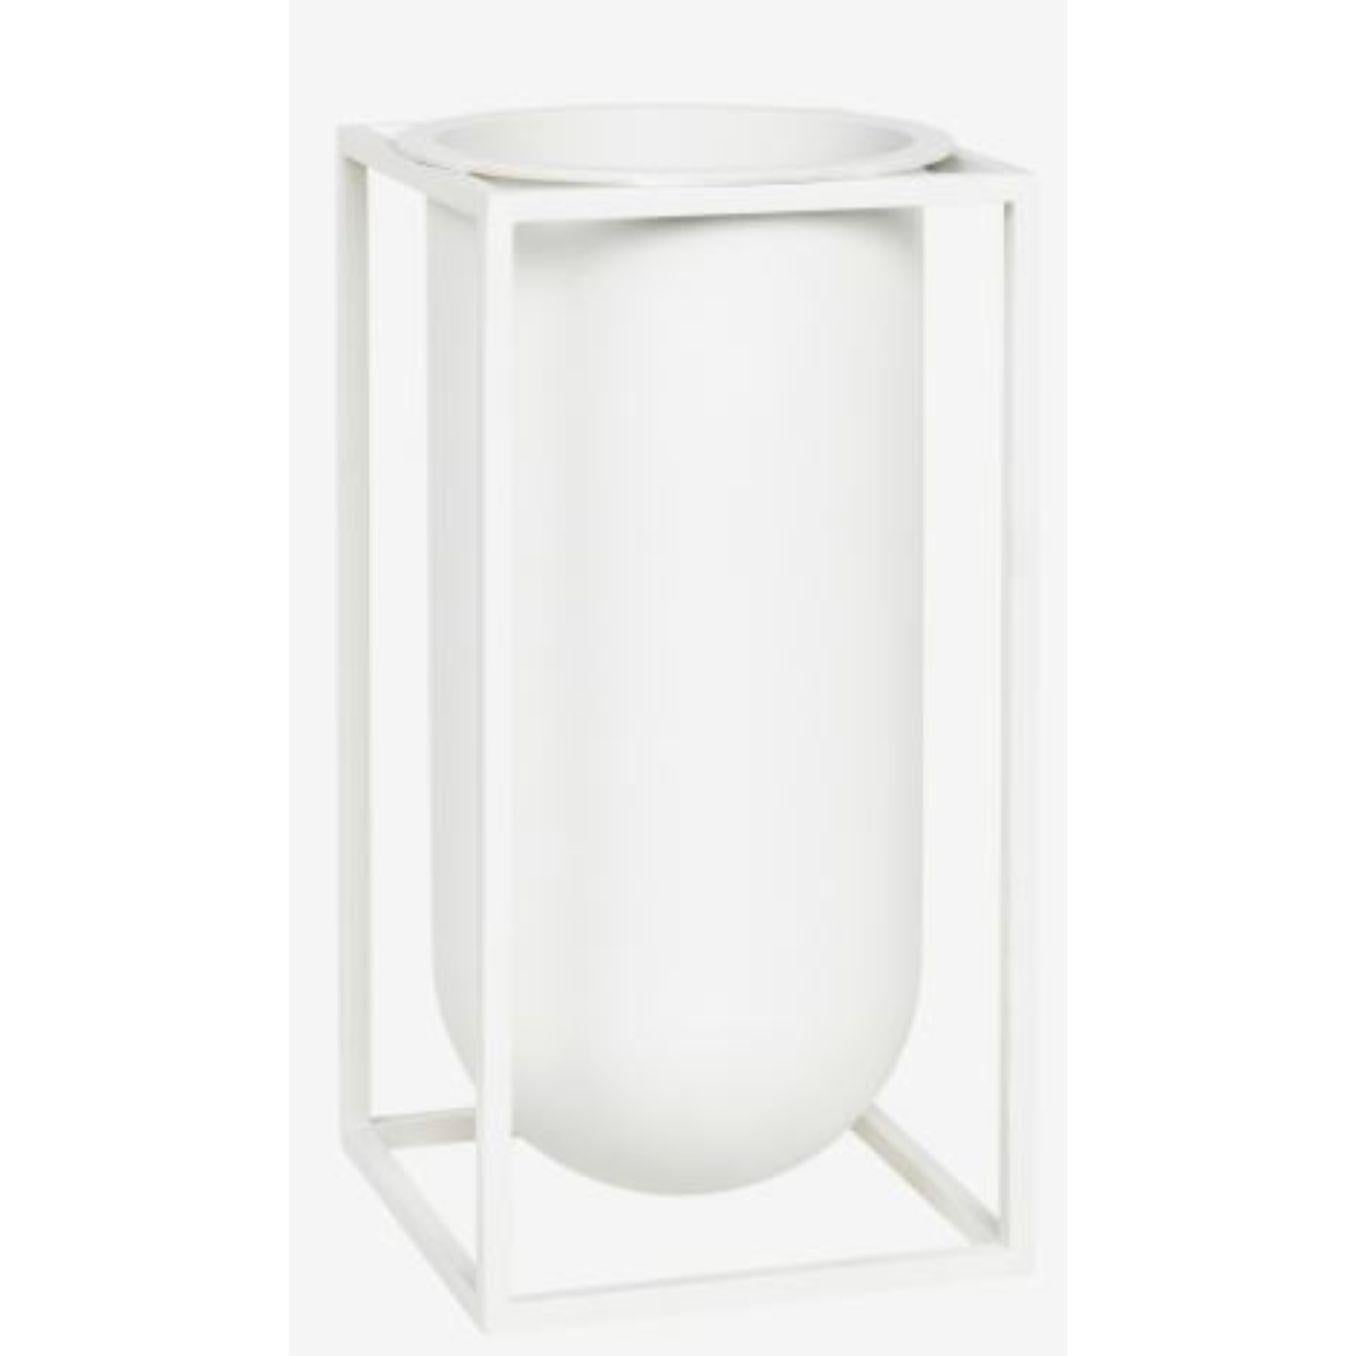 White Lolo Kubus vase by Lassen
Dimensions: D 12 x W 12 x H 24 cm 
Materials: Metal 
Weight: 2.50 Kg

Kubus Vase Lolo was originally designed by Søren Lassen in 2014, but was launched in celebration of by Lassen’s 10th anniversary 2018. The